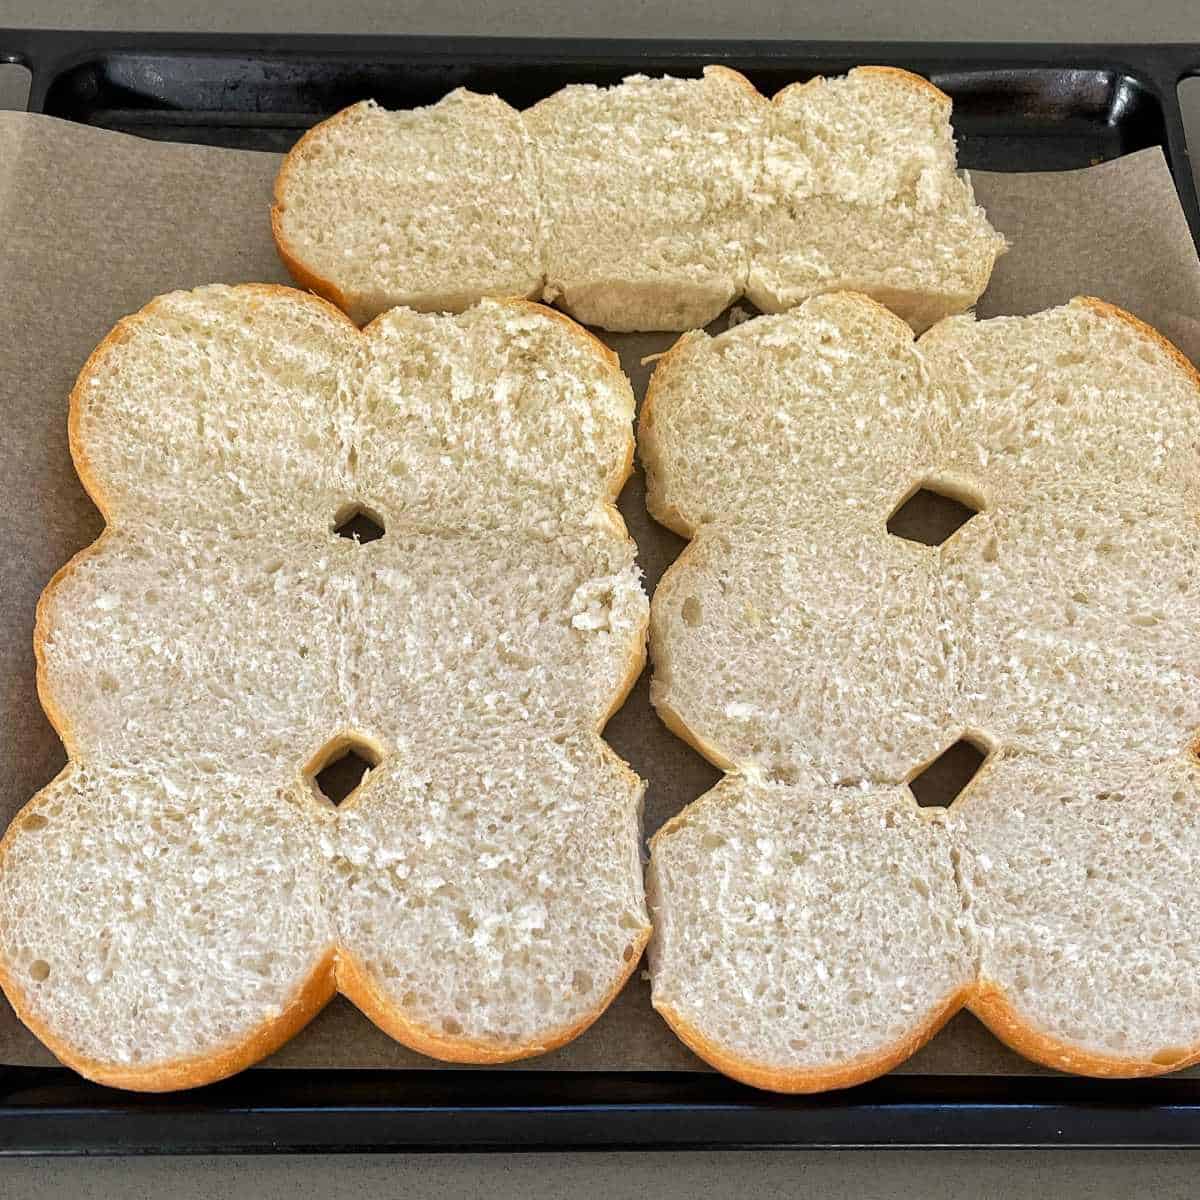 Slider buns cut in half on a lined oven tray